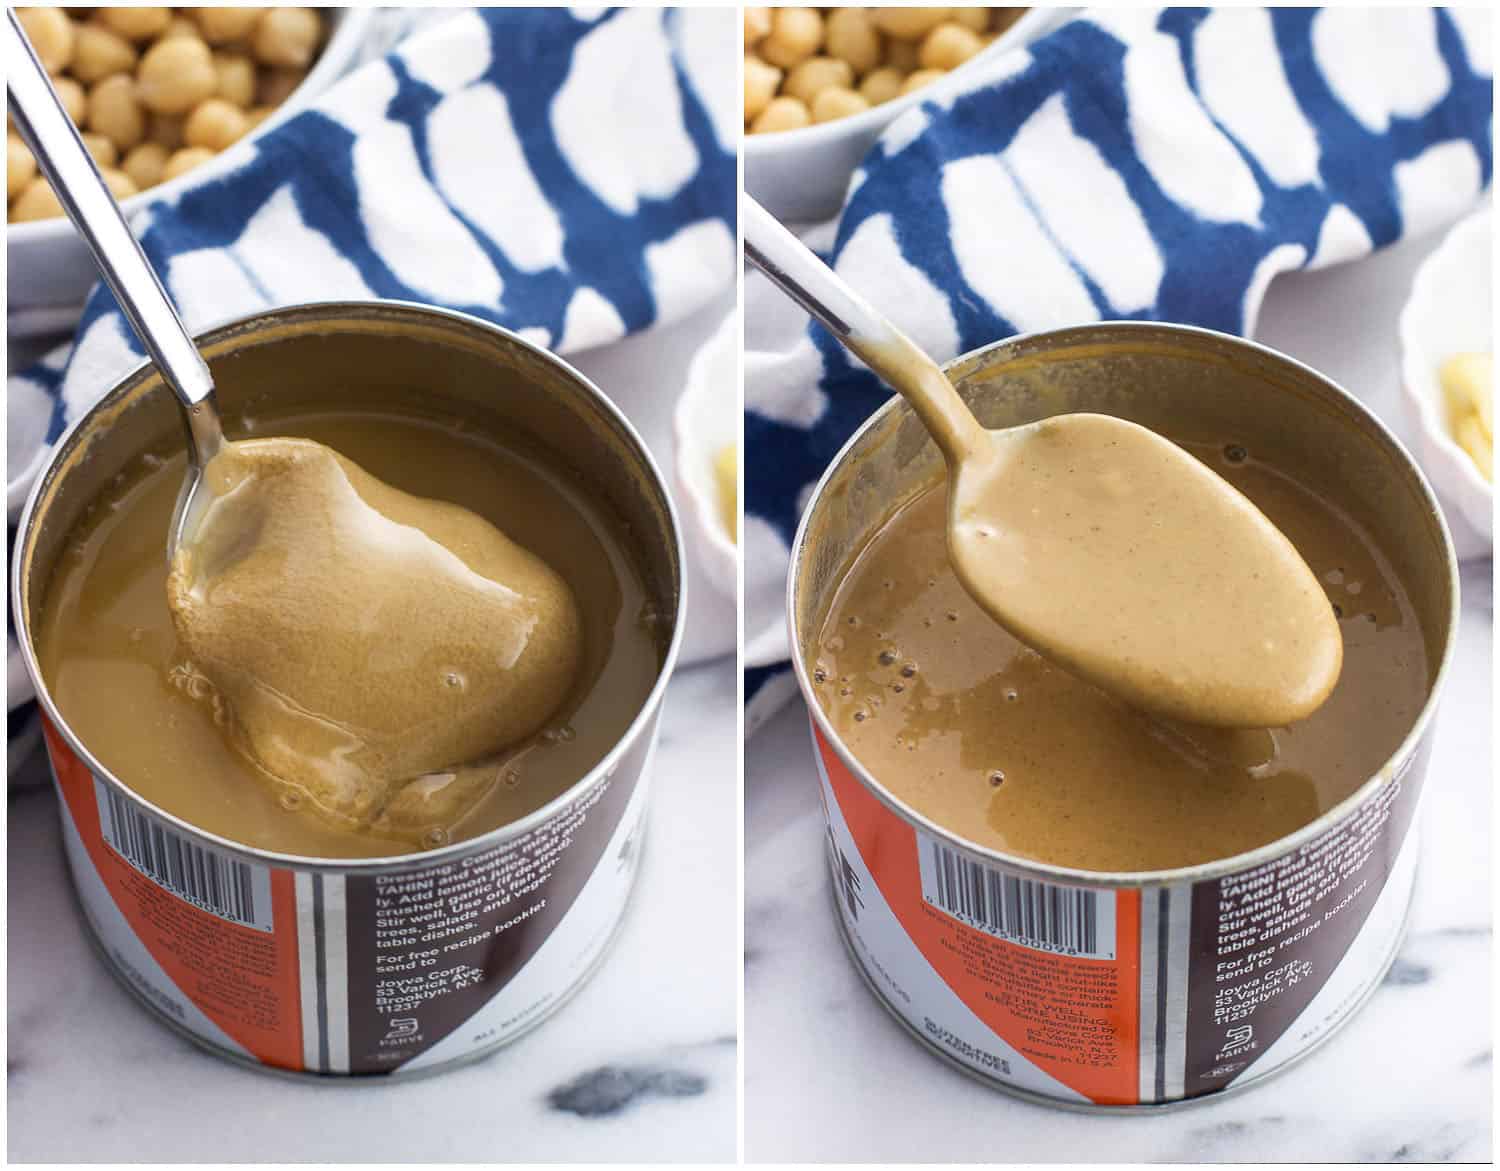 A side-by-side image of a jar of tahini. The one on the left is unstirred and the one on the right is well-stirred and smooth.